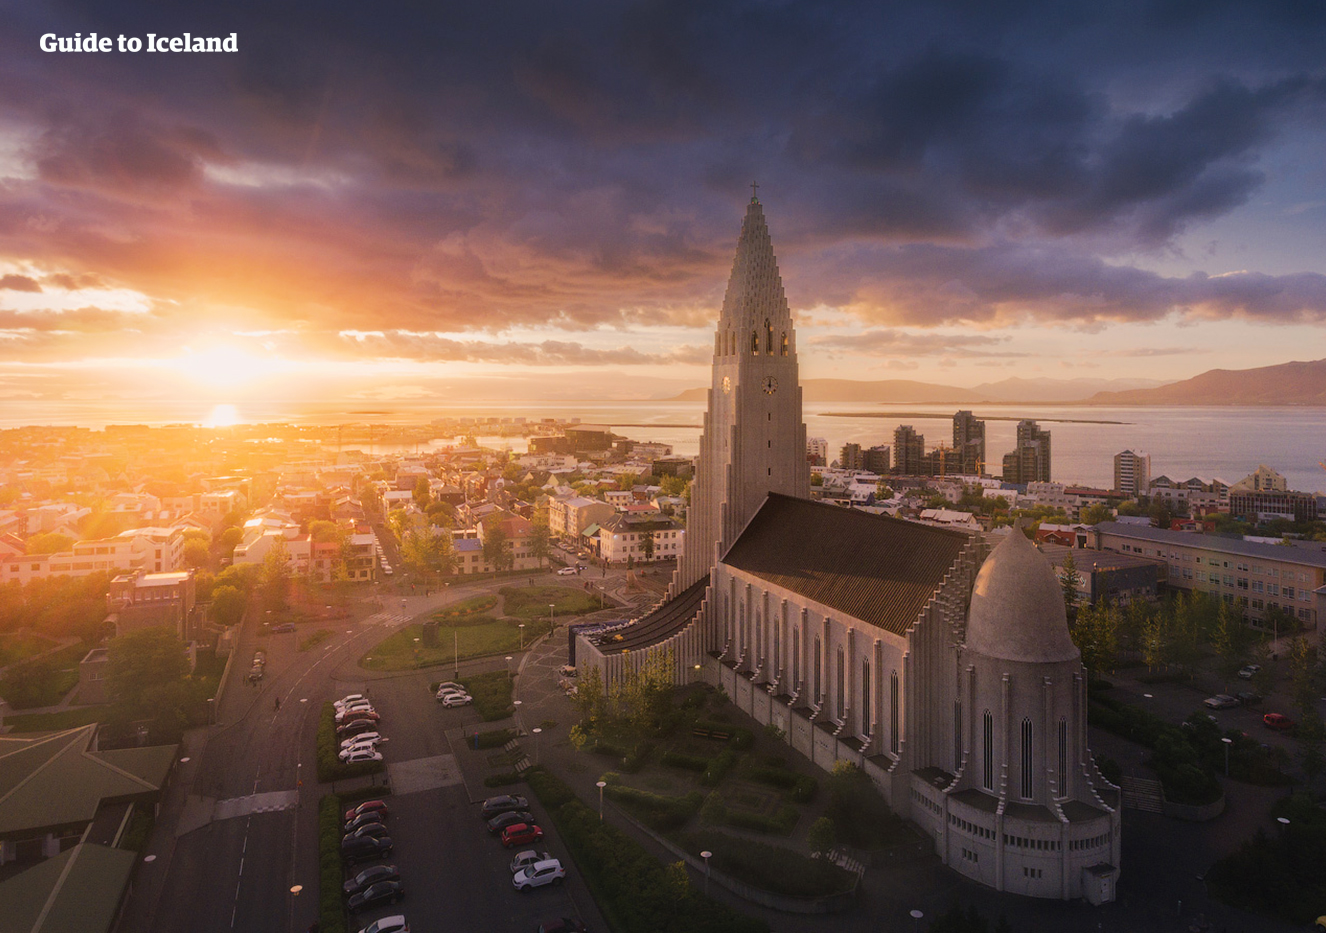 Travel Safety in Iceland